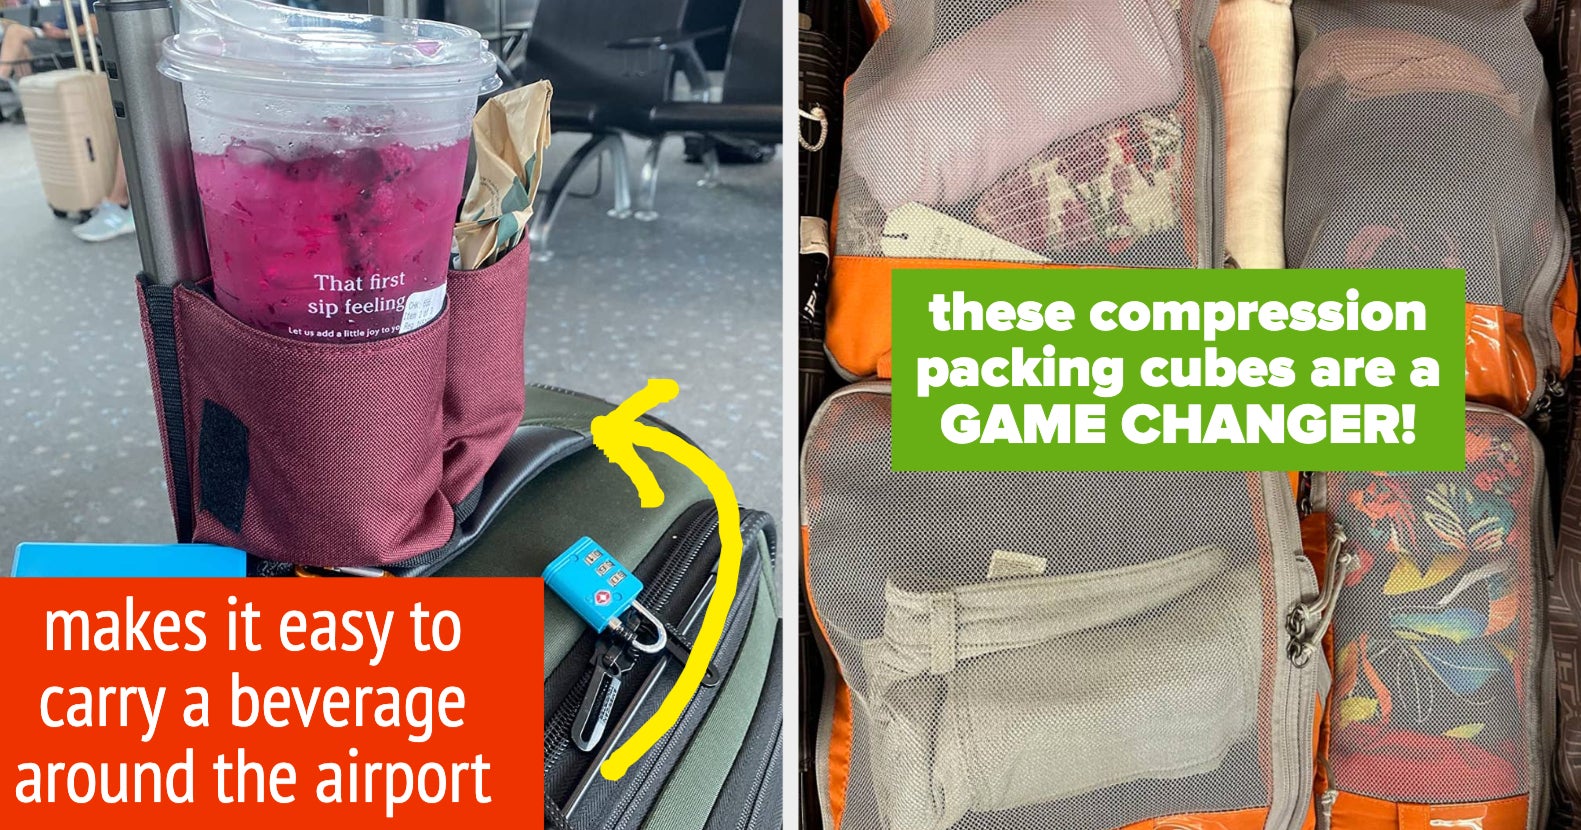 This Luggage Cover Is a Travel Game-changer